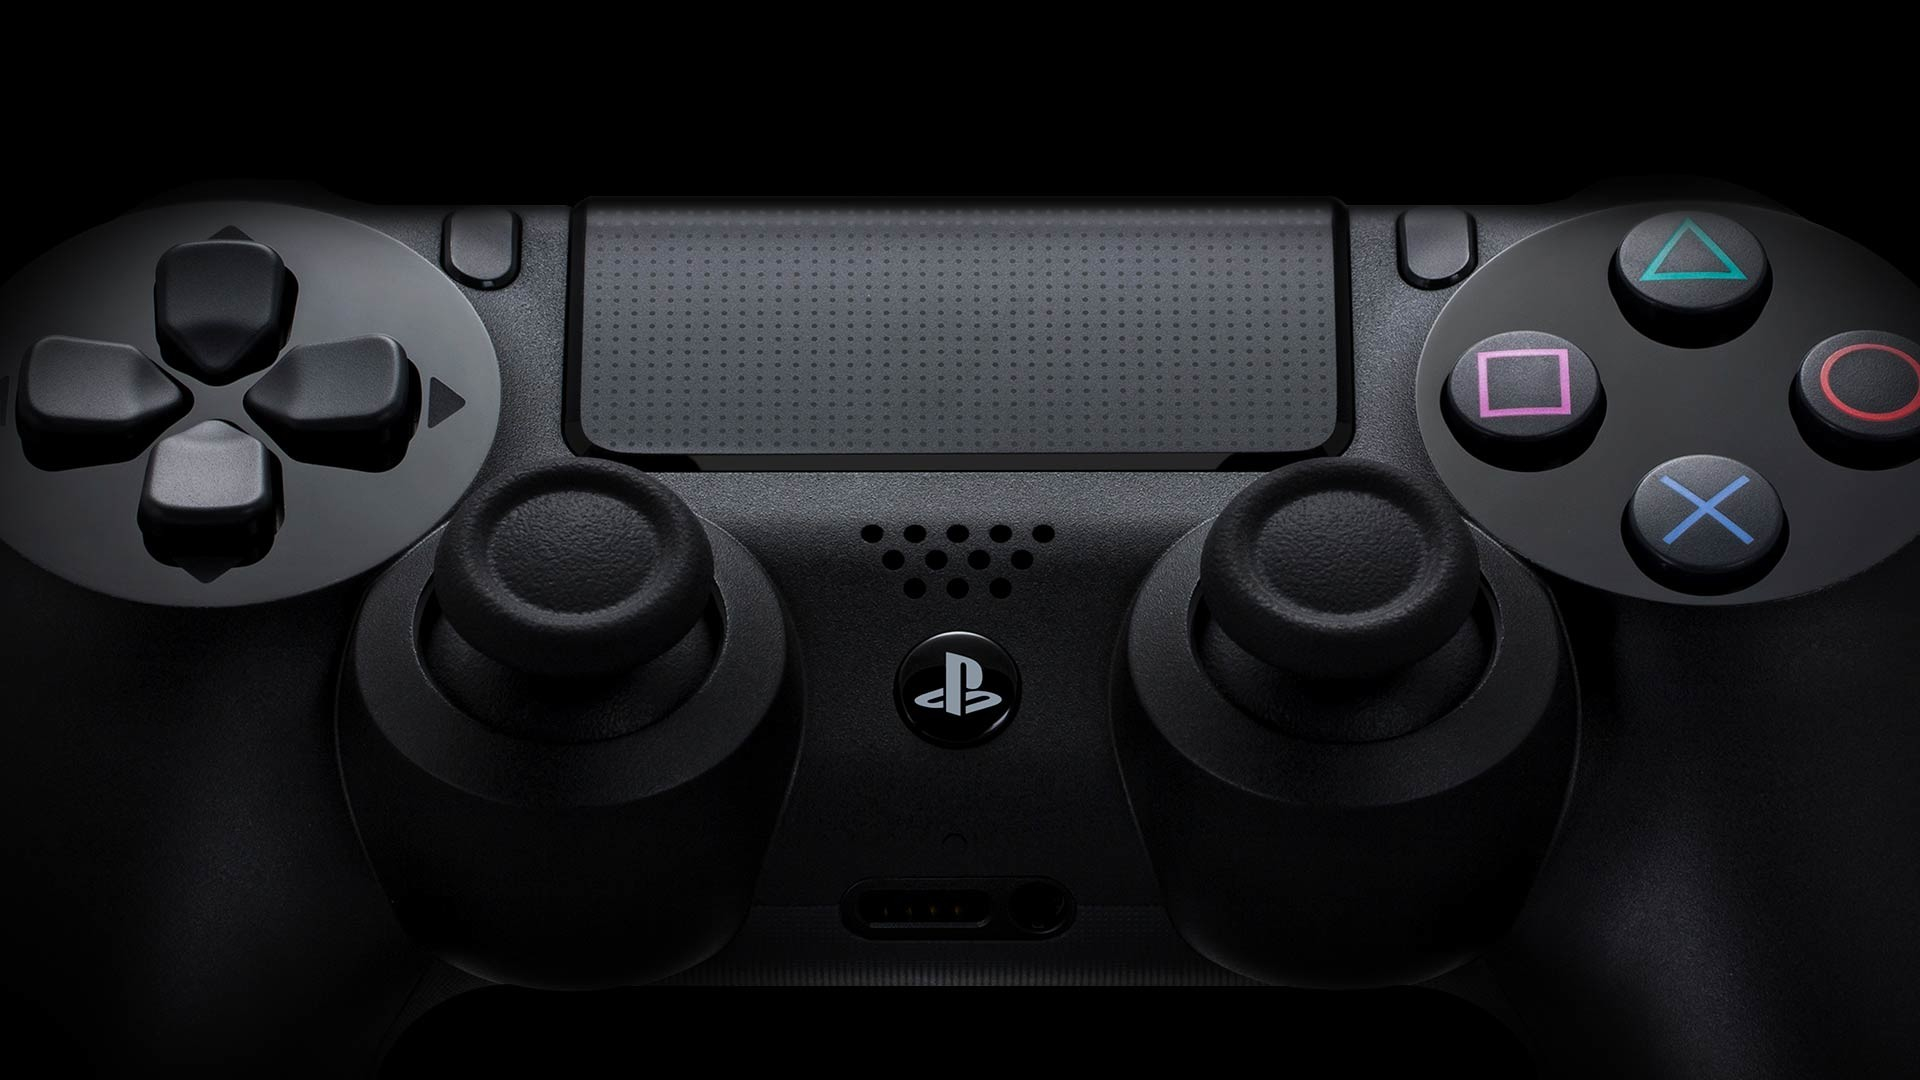 1920x1080 Free download 75 Playstation Controller Wallpapers on WallpaperPlay [] for your Desktop, Mobile \u0026 Tablet | Explore 31+ PS4 Symbols Wallpapers | PS4 Symbols Wallpapers, Symbols Wallpapers, Wallpaper Symbols